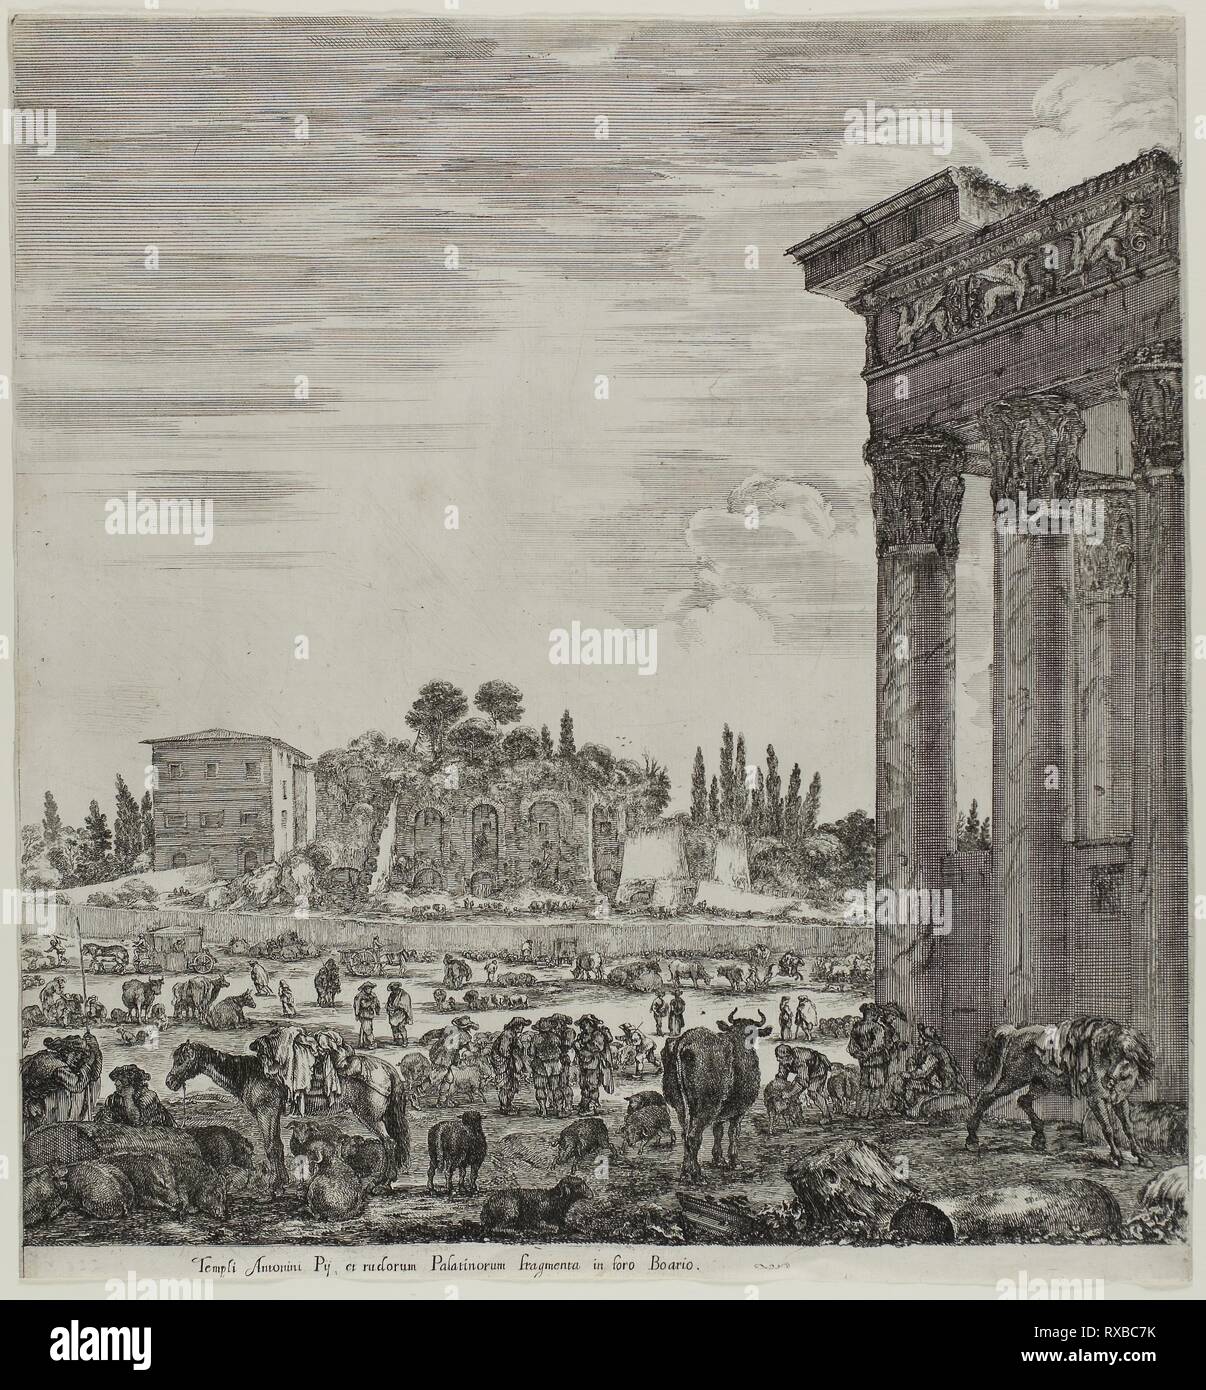 The Temple of Antonin and the Campo Vaccino. Stefano della Bella; Italian, 1610-1664. Date: 1654. Dimensions: 298 x 277 mm (image); 298 x 280 mm (sheet). Etching on ivory laid paper. Origin: Italy. Museum: The Chicago Art Institute. Stock Photo